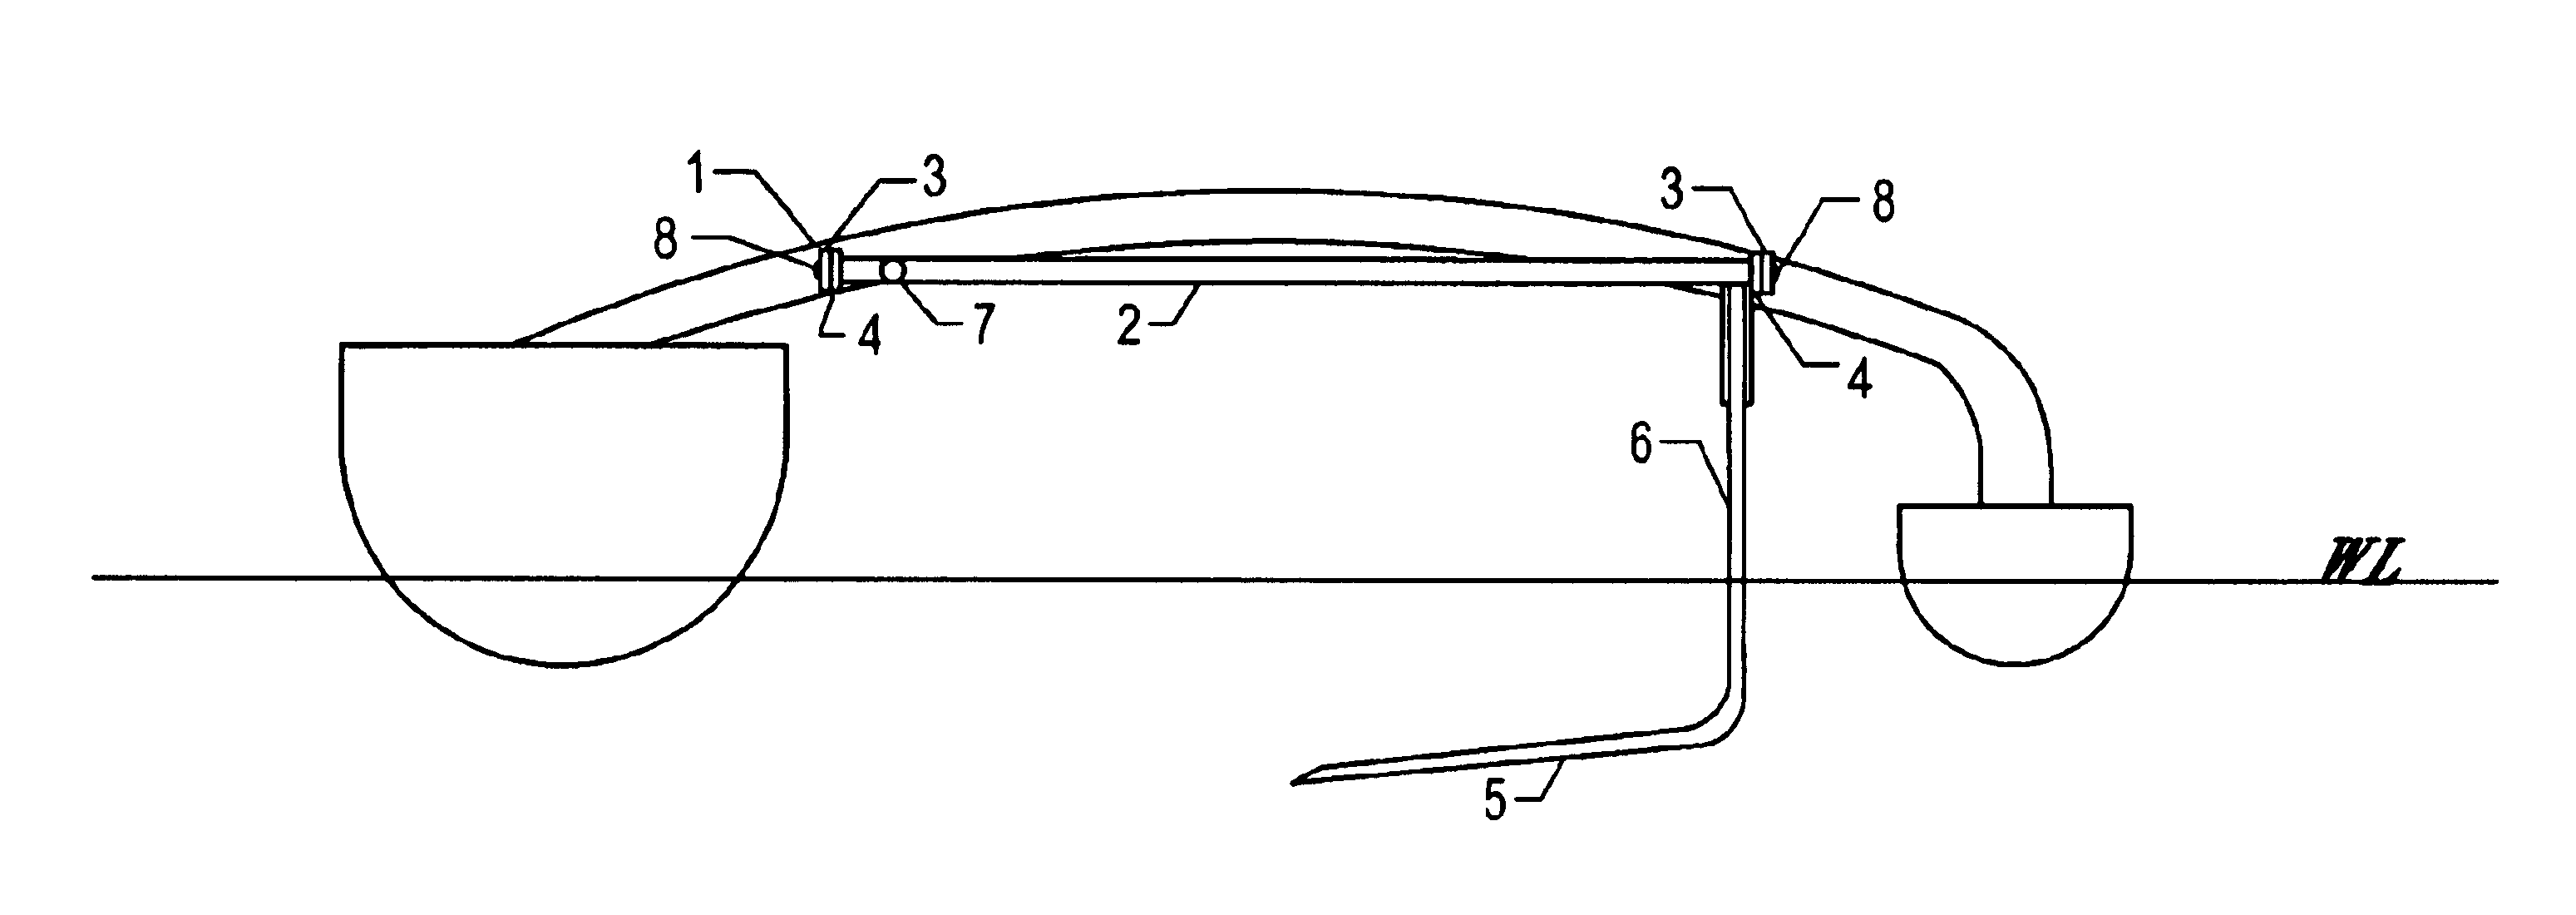 Manual hydrofoil and spar truss assembly for wind powered watercraft